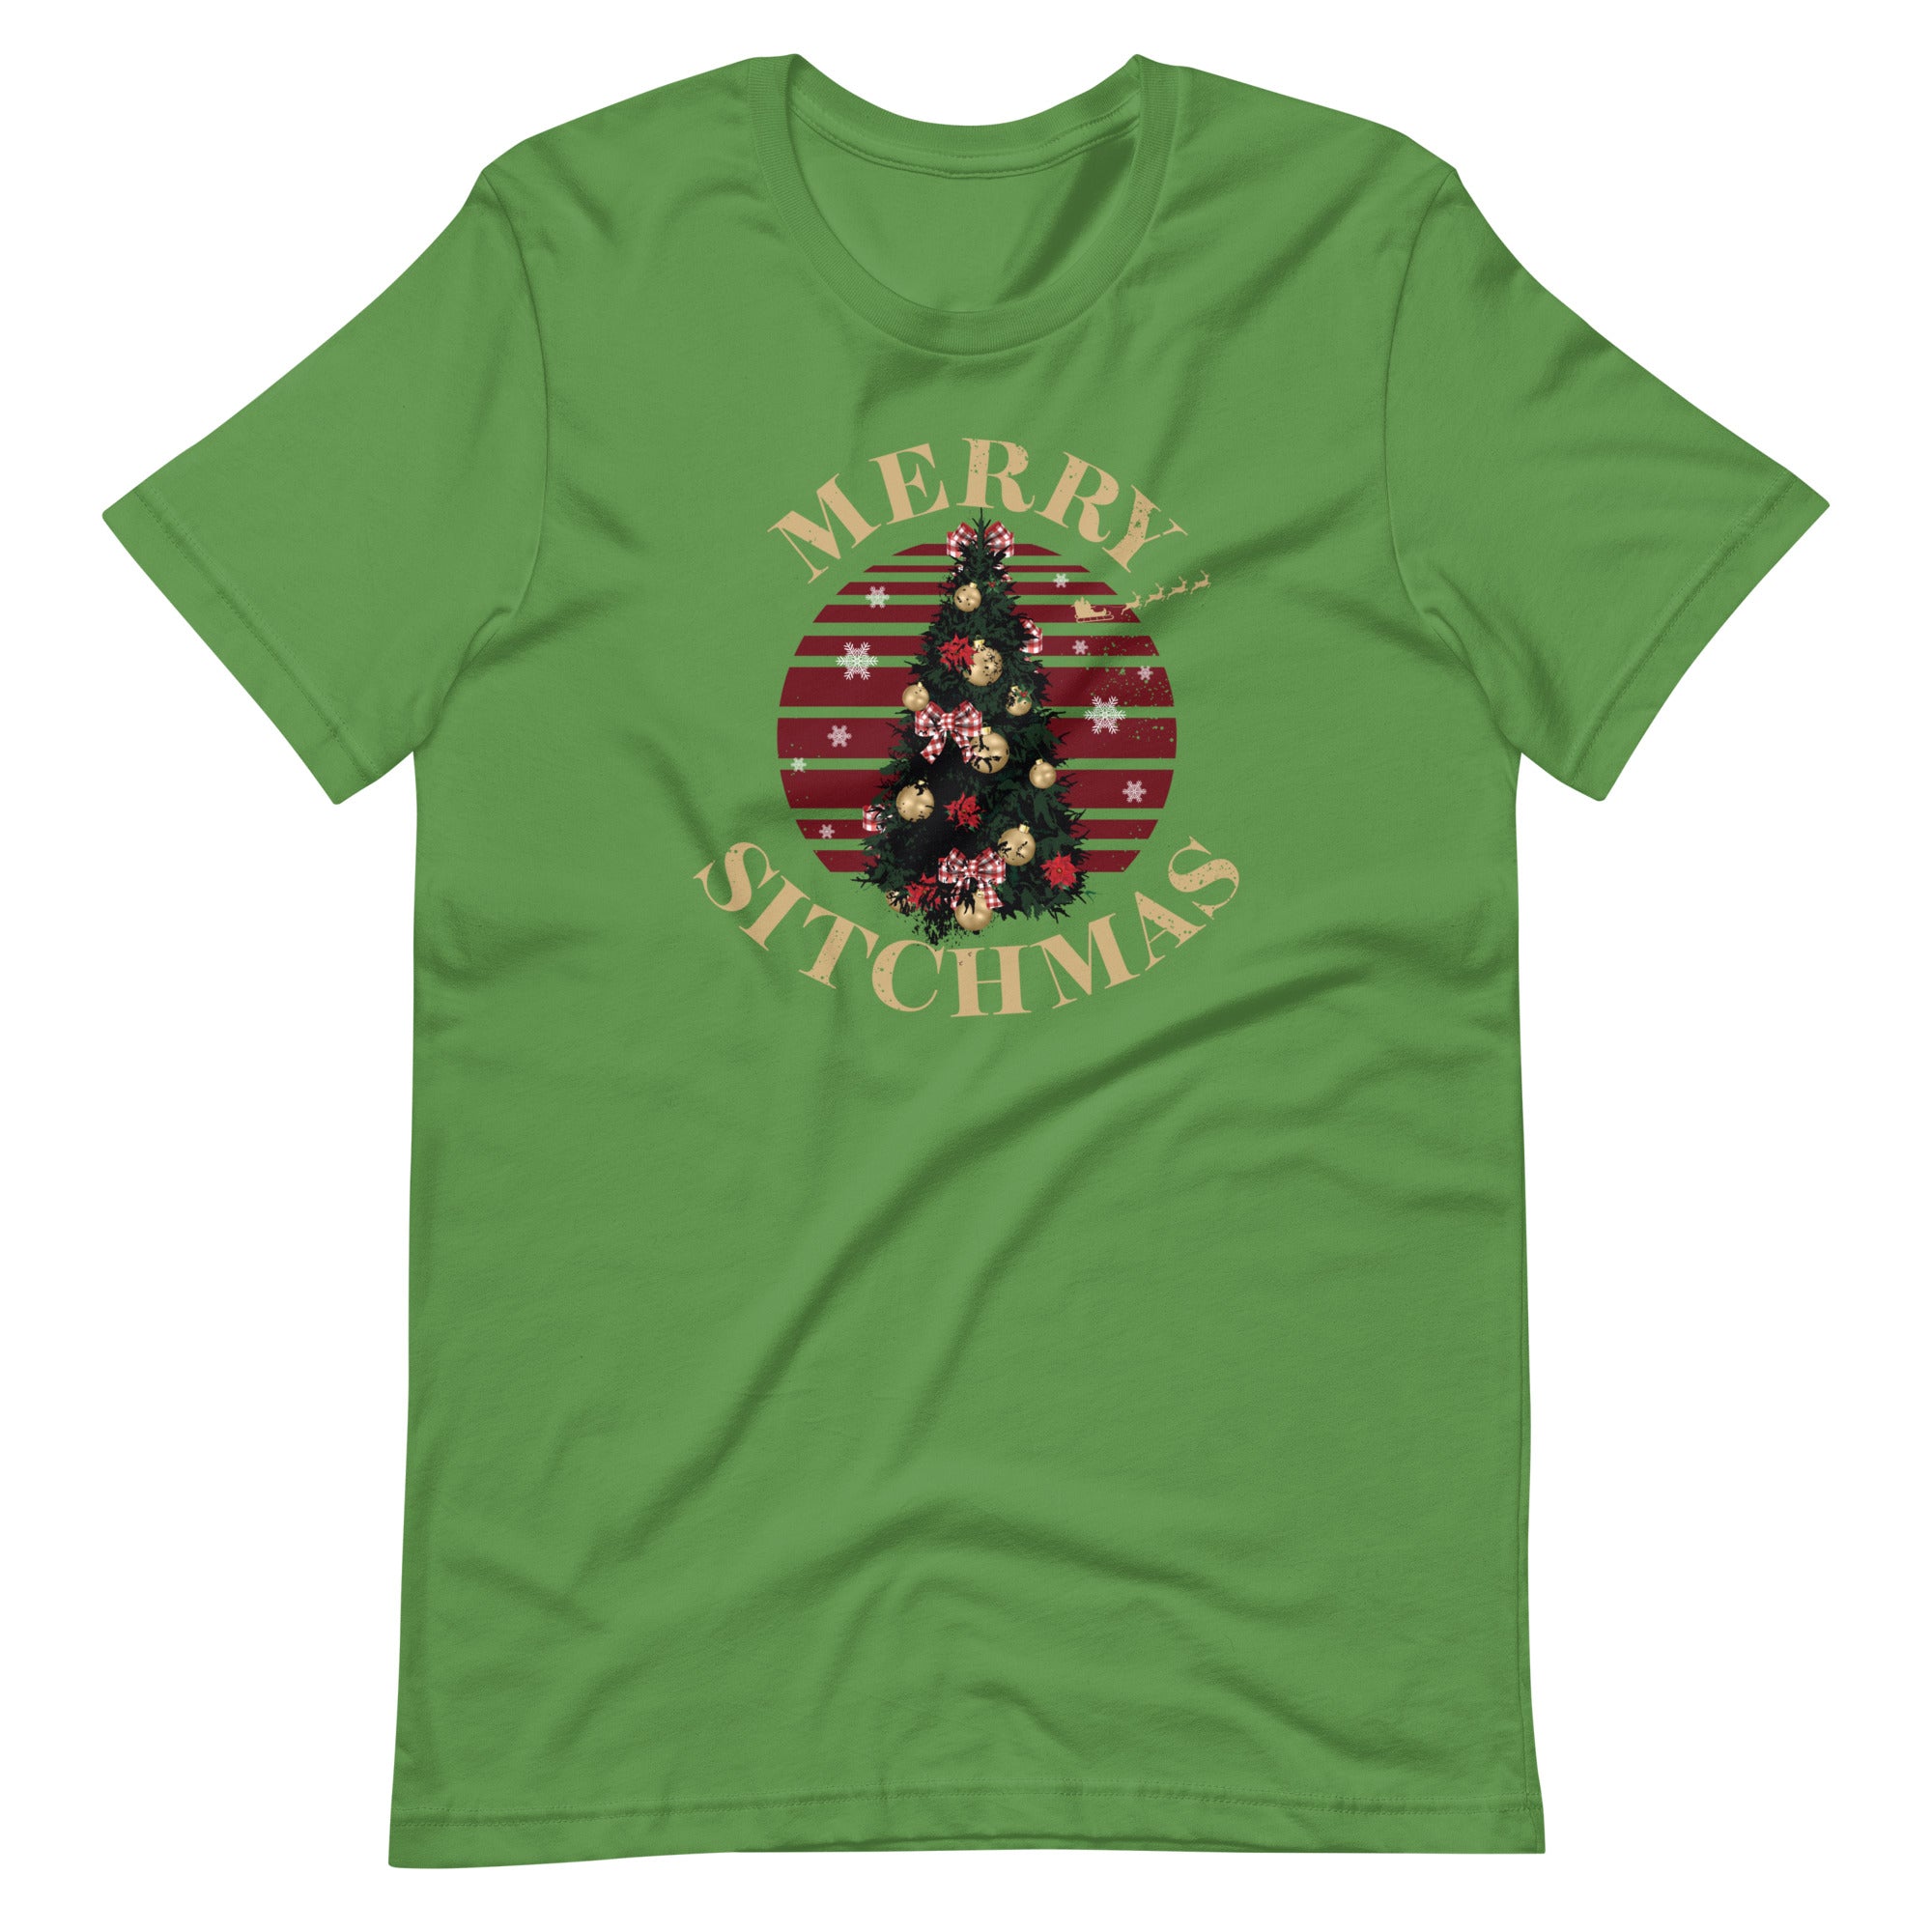 Mike Sorrentino Merry Sitchmas Shirt